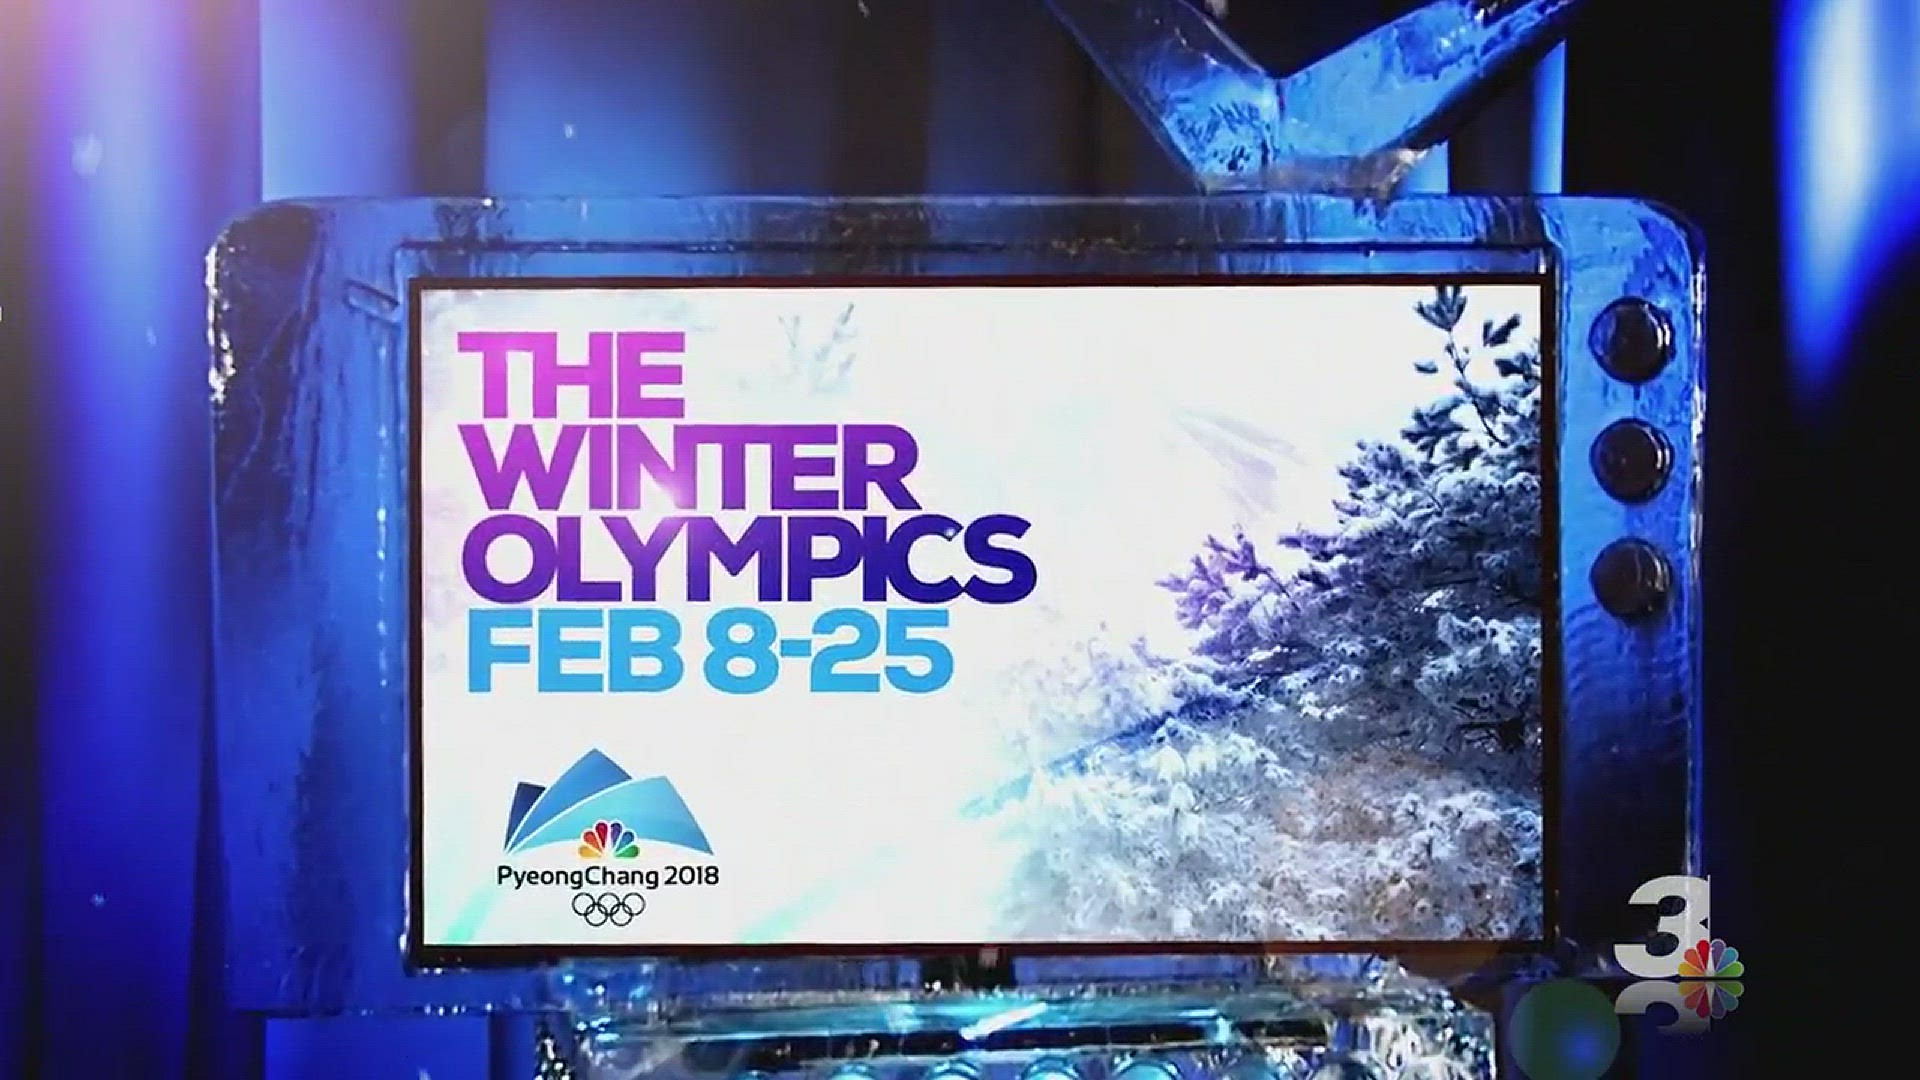 Set your DVR! Due to the Winter Olympics, there are changes to the programming on Channel 3 now through Friday, Feb. 23.